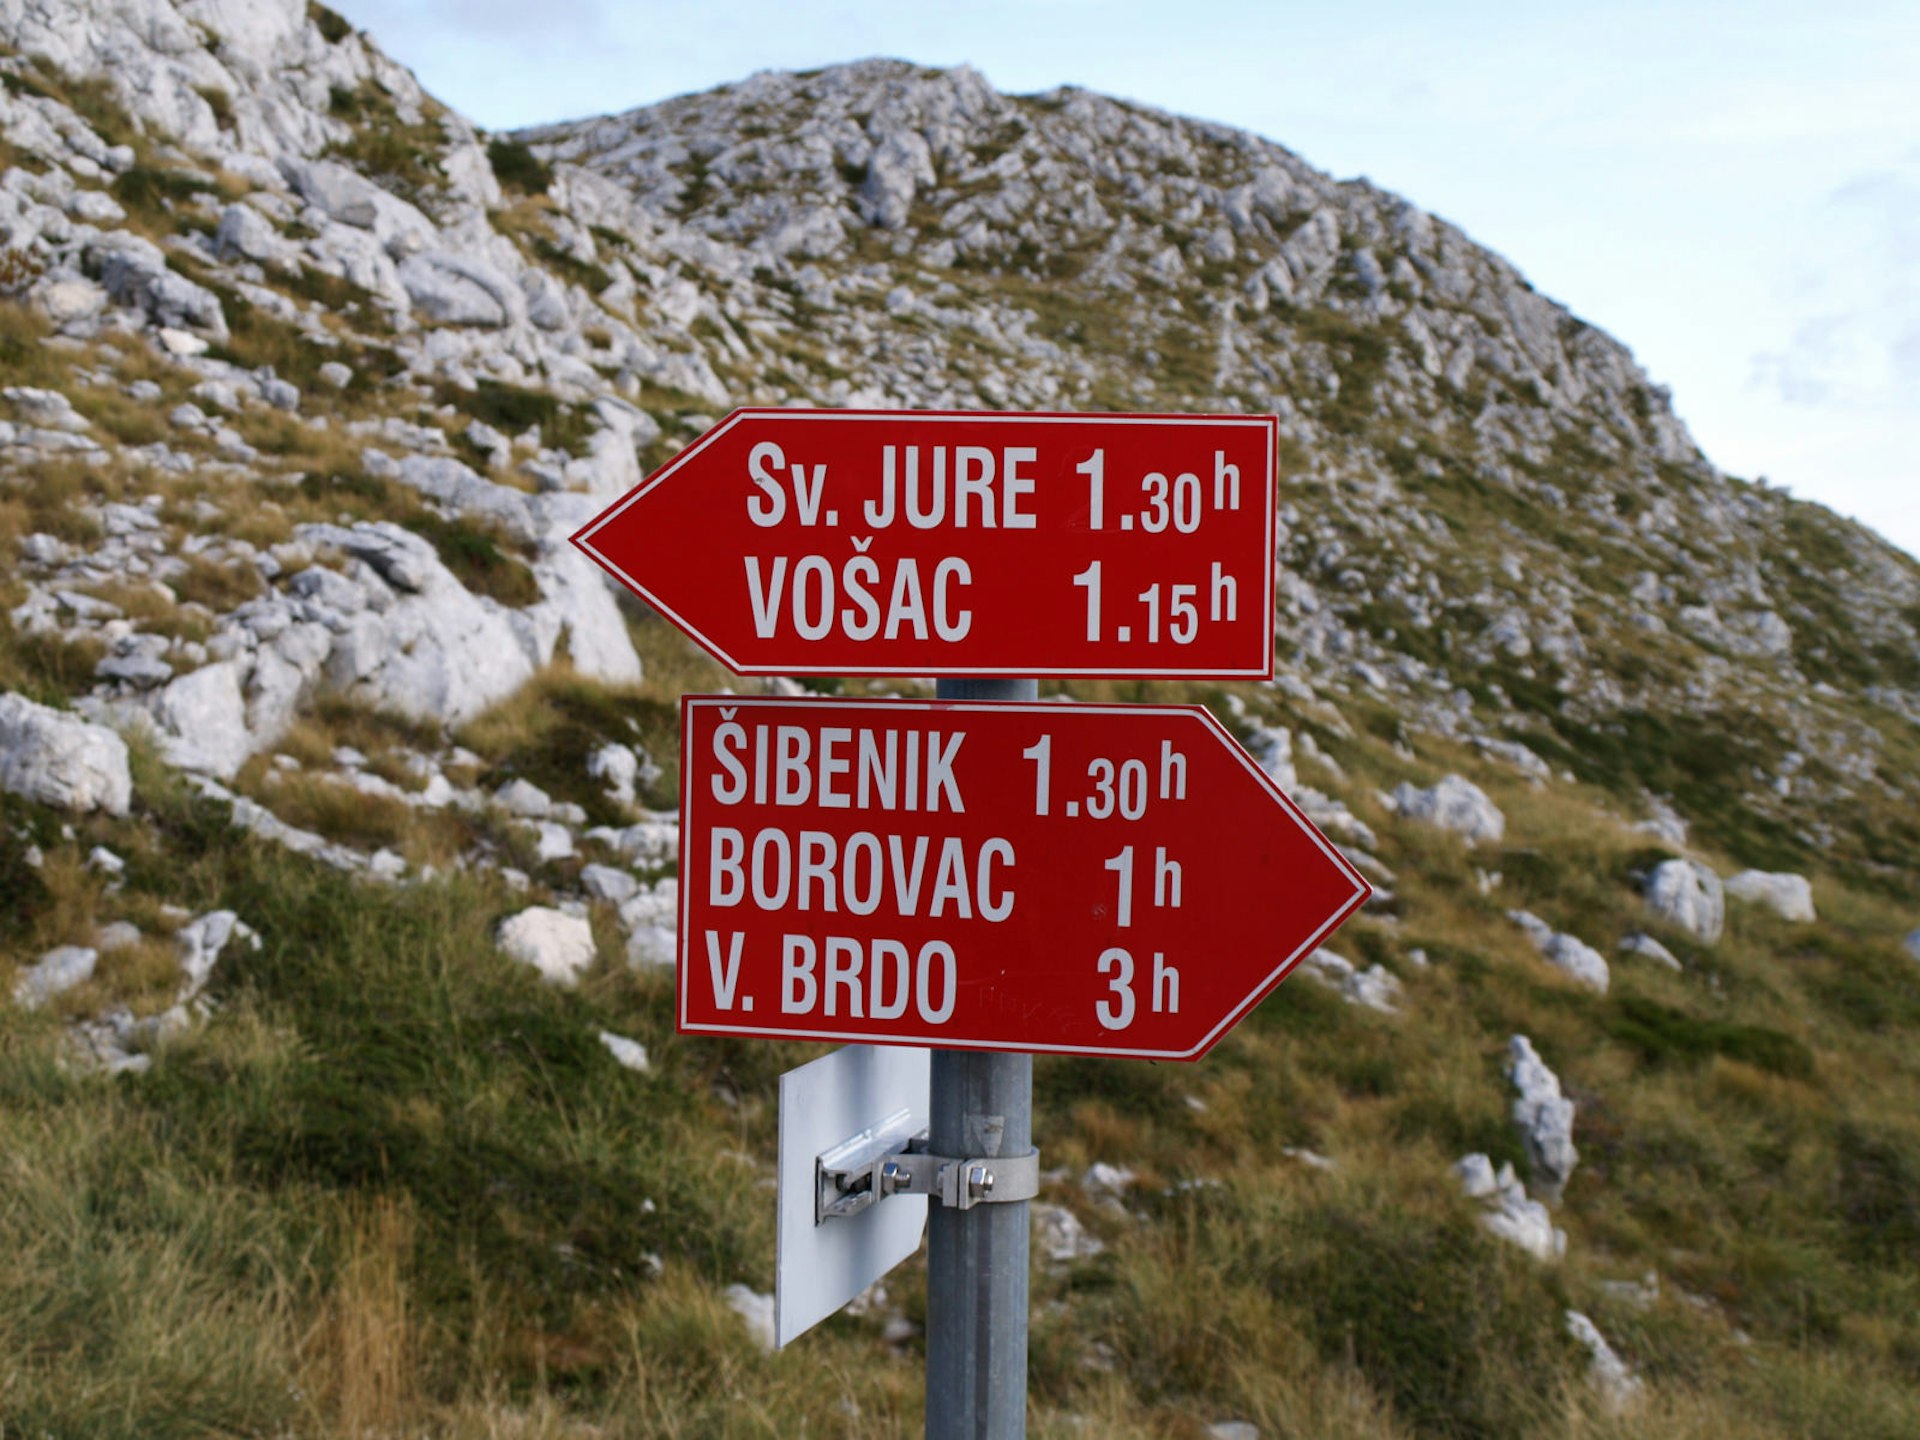 Signs point the way in Croatia’s Biokovo mountains © Perica / CC BY 2.0